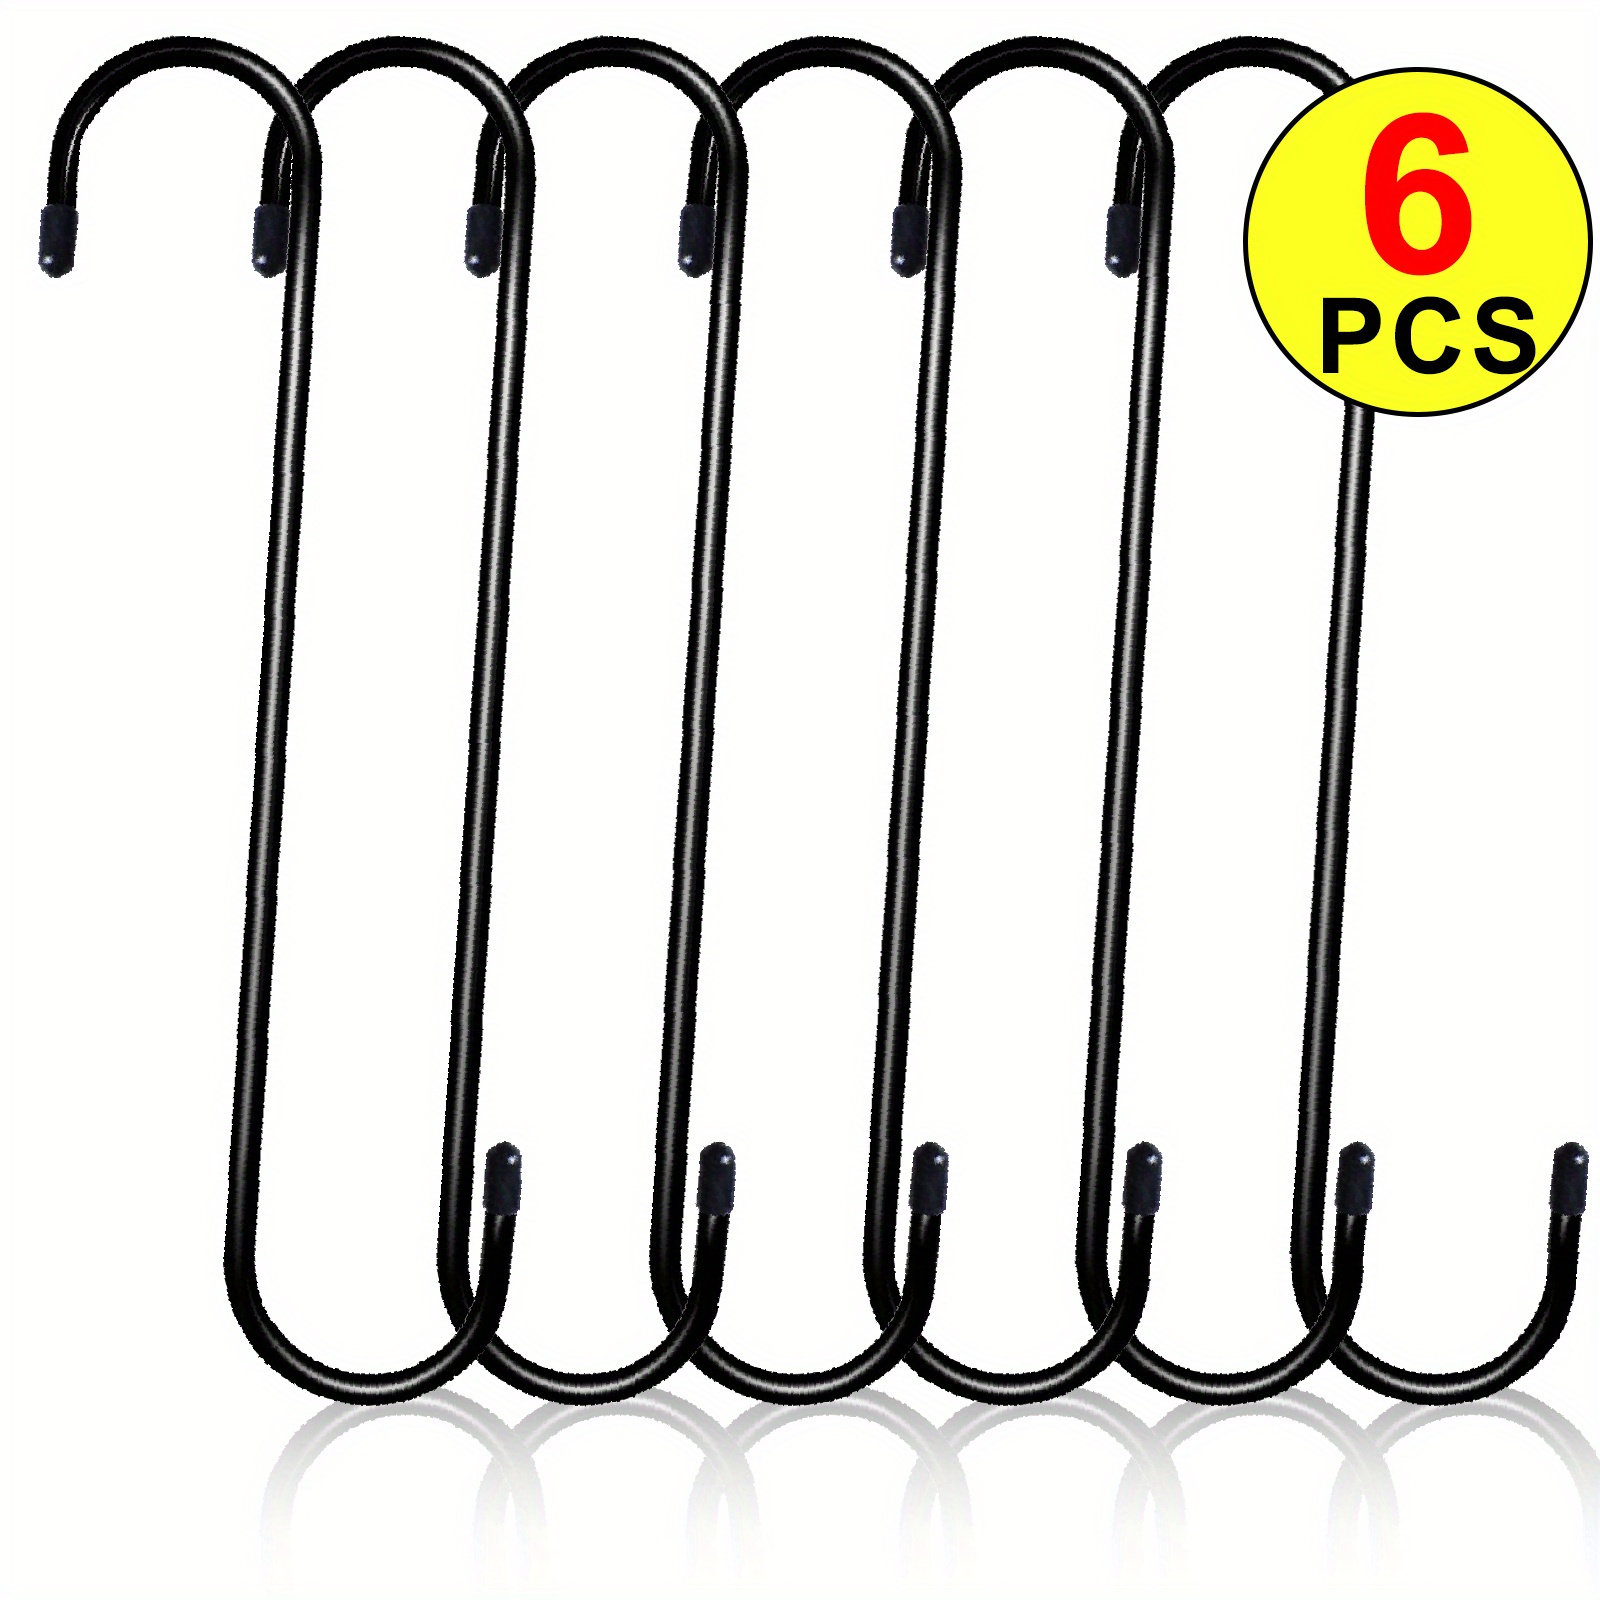 HiGift 8 Pack 10 Inch Large S Hooks for Hanging Plants Outdoor,Heavy Duty S  Shaped Extension Hook for Hanging Basket,Garden Tools,Pots and